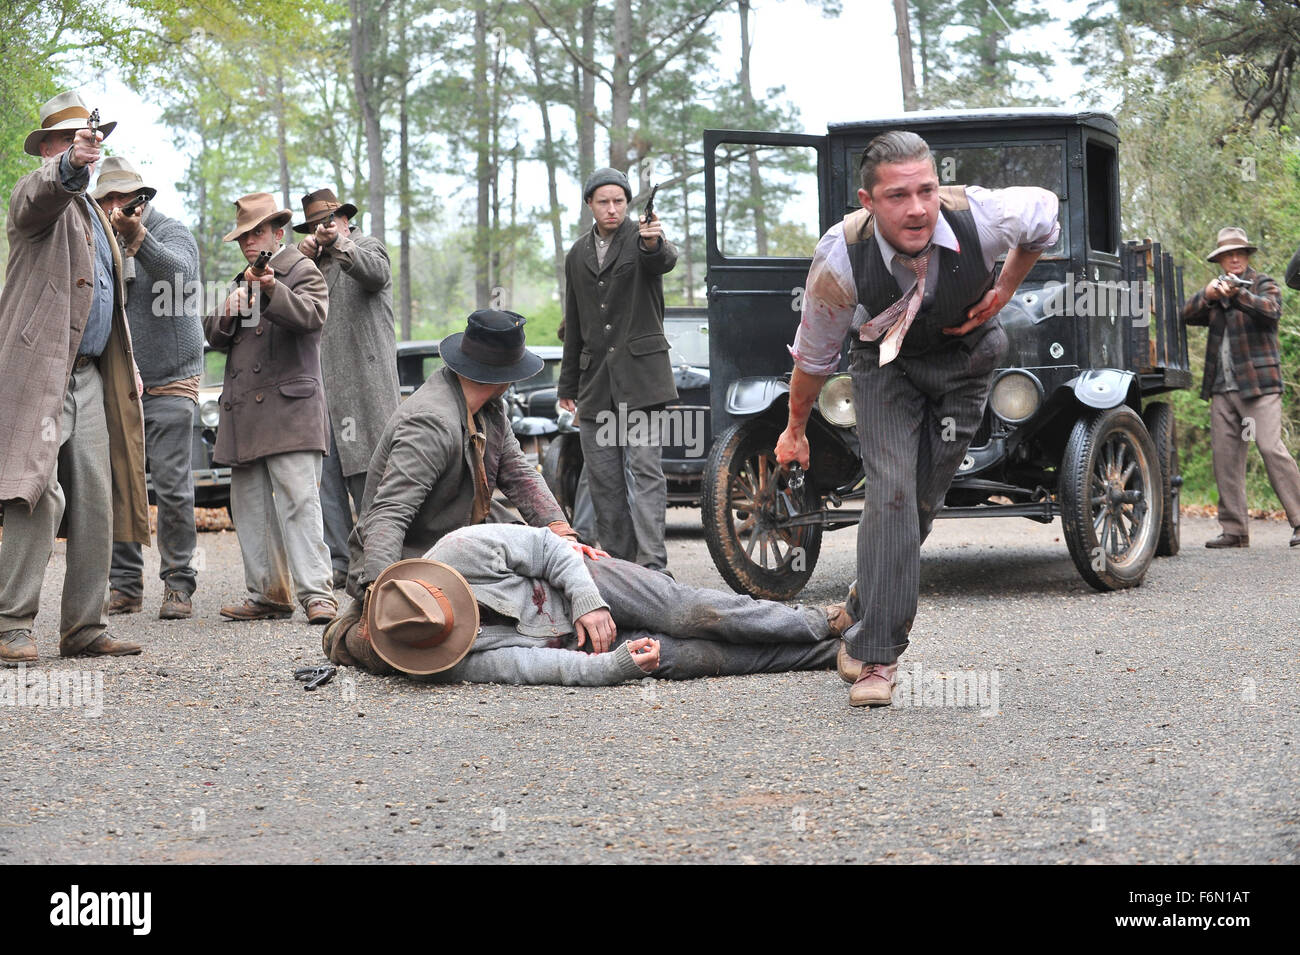 RELEASE DATE: August 31, 2012   MOVIE TITLE: Lawless   STUDIO: The Weinstein Company   DIRECTOR: John Hillcoat  PLOT: Set in the Depression-era Franklin County, Virginia, a bootlegging gang is threatened by authorities who want a cut of their profits   PICTURED: SHIA LABEOUF as Jack Bondurant   (Credit Image: c The Weinstein Company/Entertainment Pictures) Stock Photo